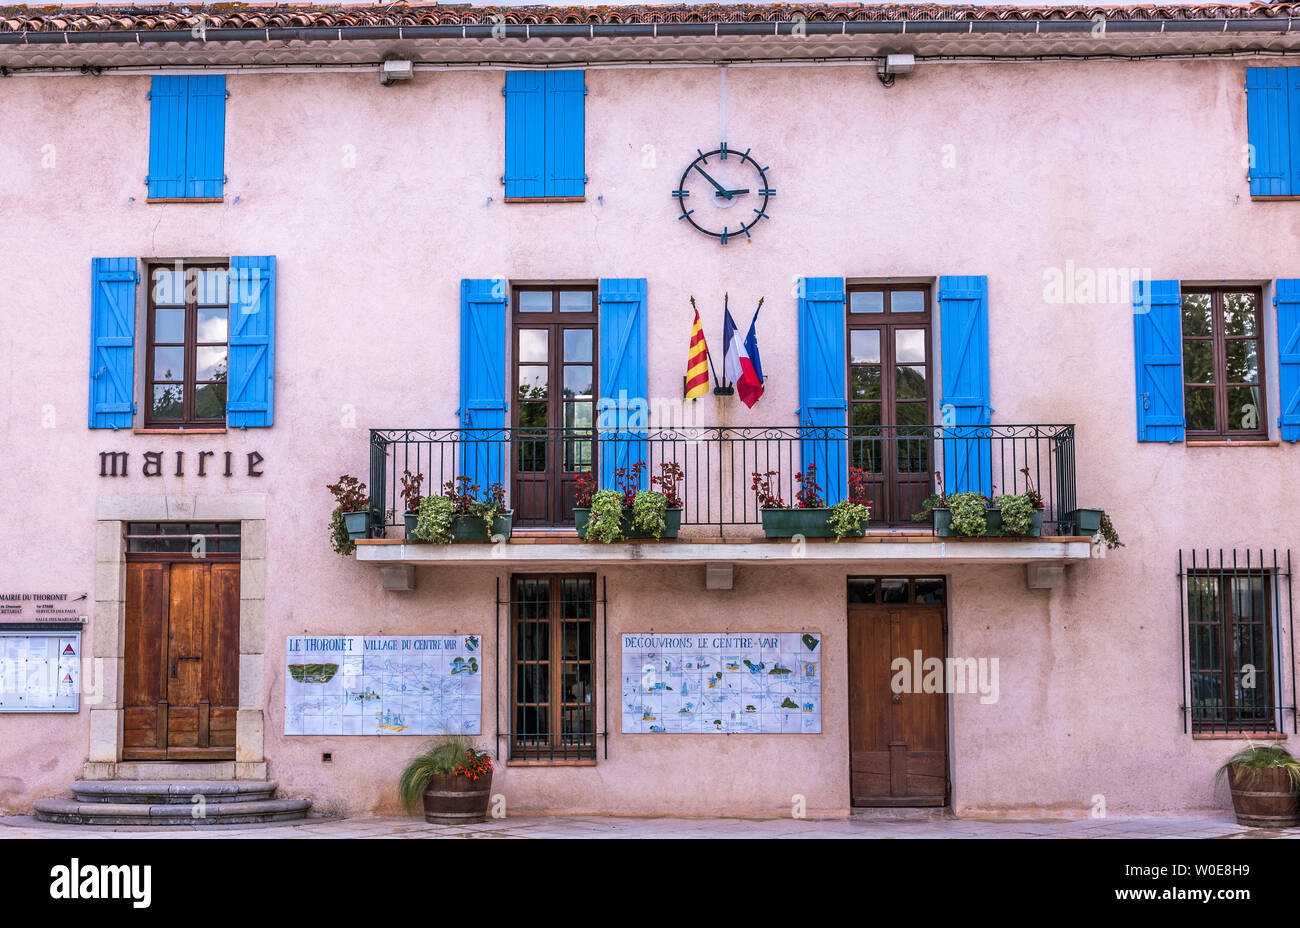 France, Provence-Alpes-Cote d'Azur, Fontaine, City hall of the village of Thoronet Stock Photo